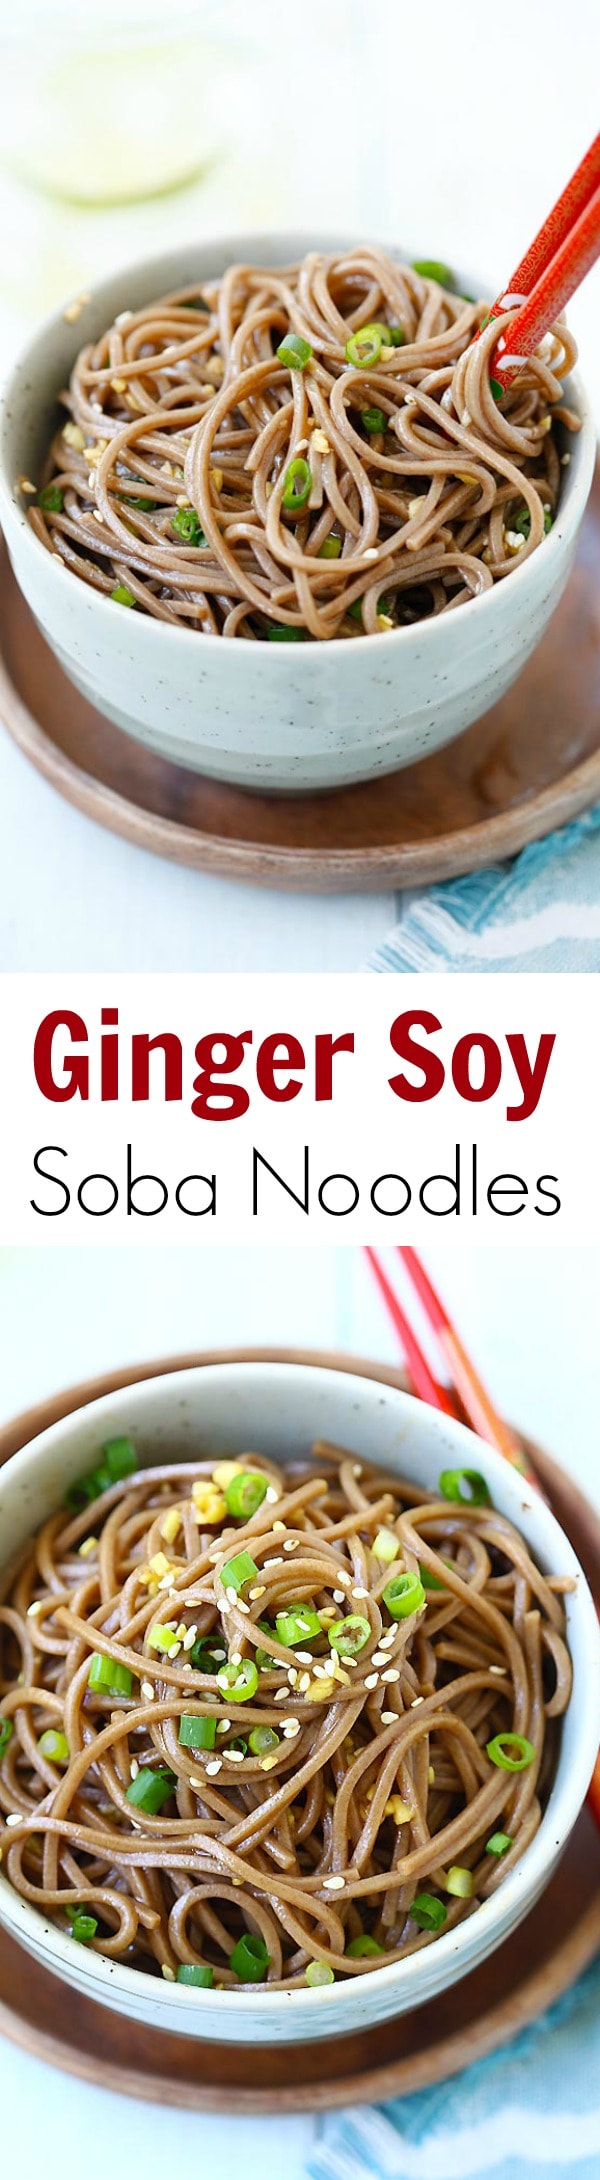 Ginger Soy Soba - the easiest and healthiest noodles made with ginger, soy sauce, honey and Japanese soba noodles. 15 minutes to make! | rasamalaysia.com